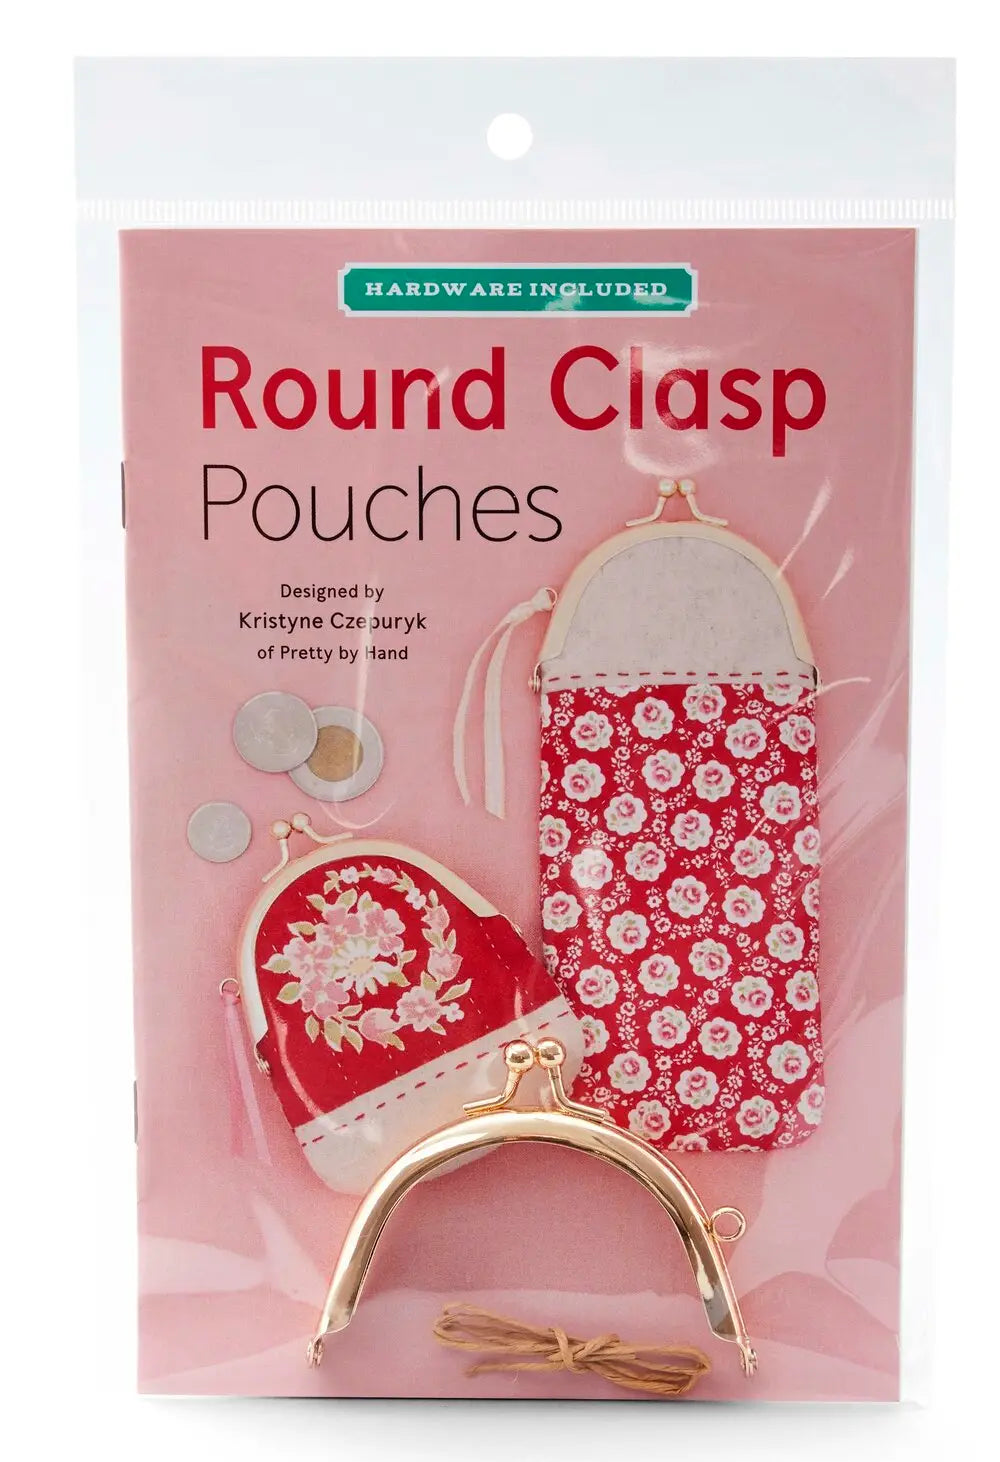 Craftermoon - Round Clasp Pouches Pattern 4